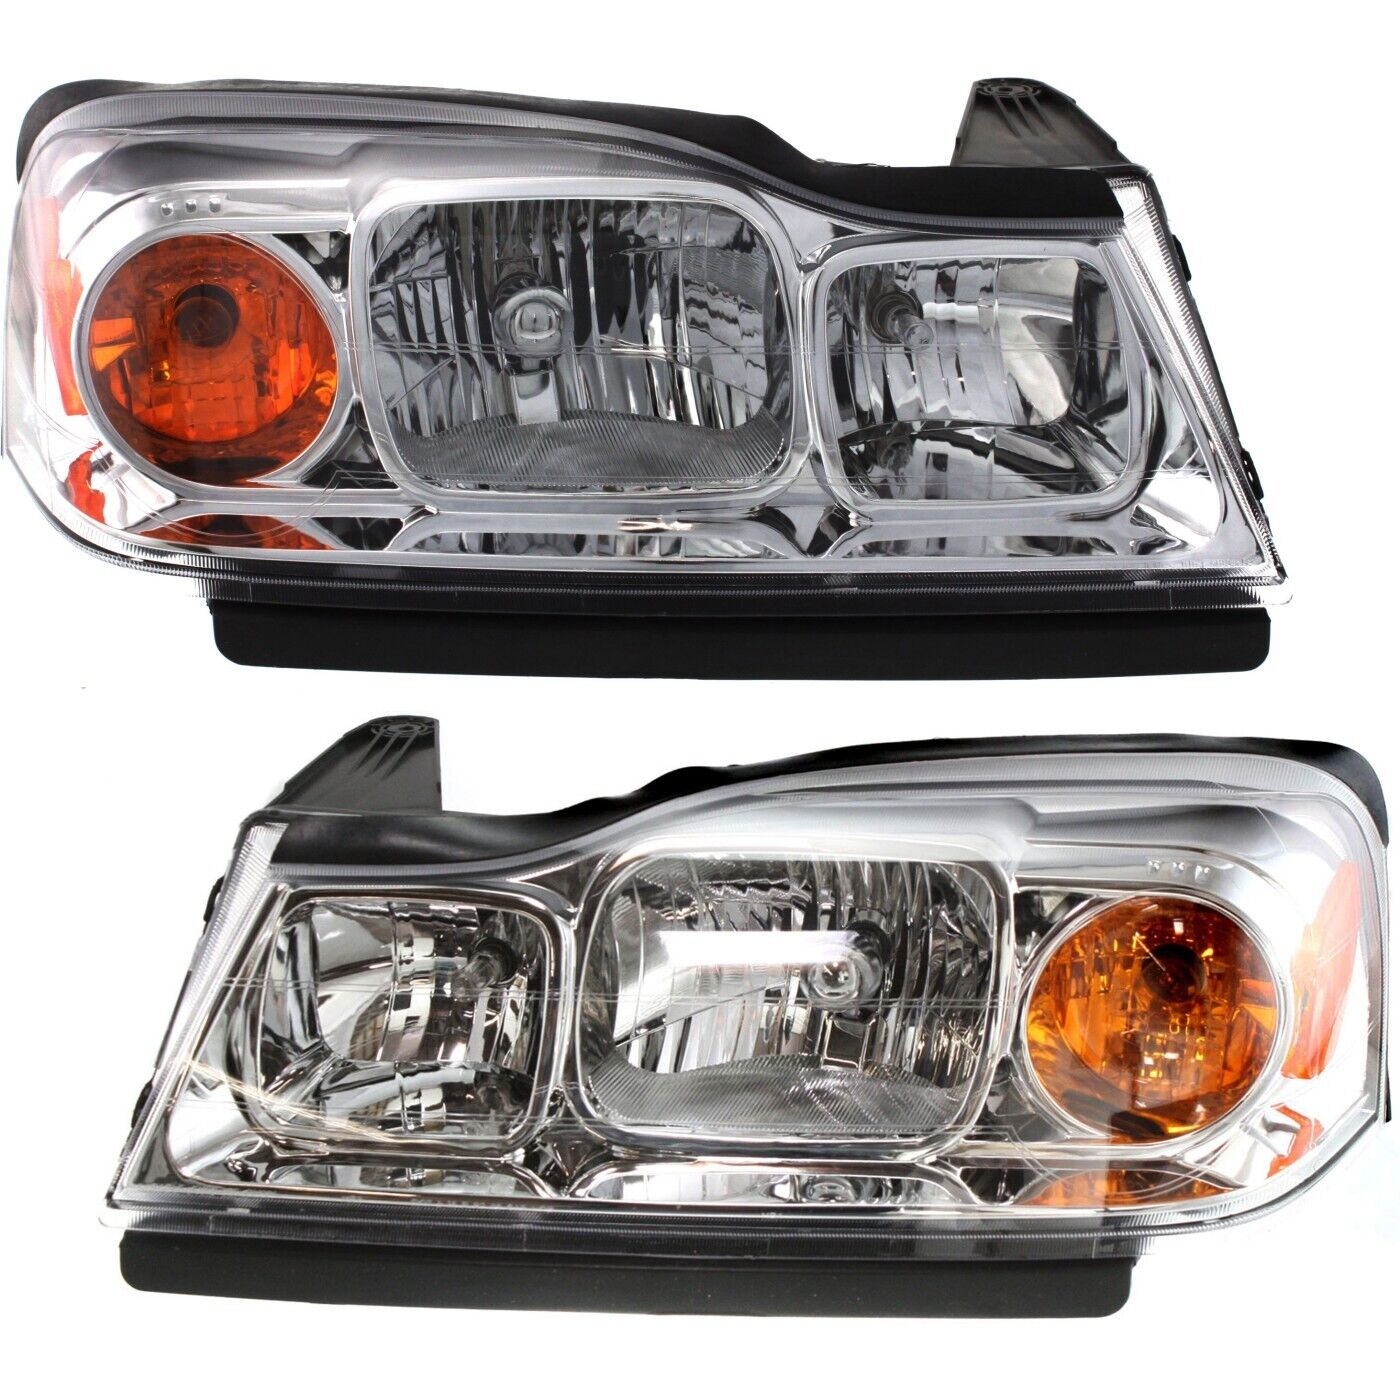 Headlight Set For 2006-2007 Saturn Vue Left and Right With Bulb 2Pc